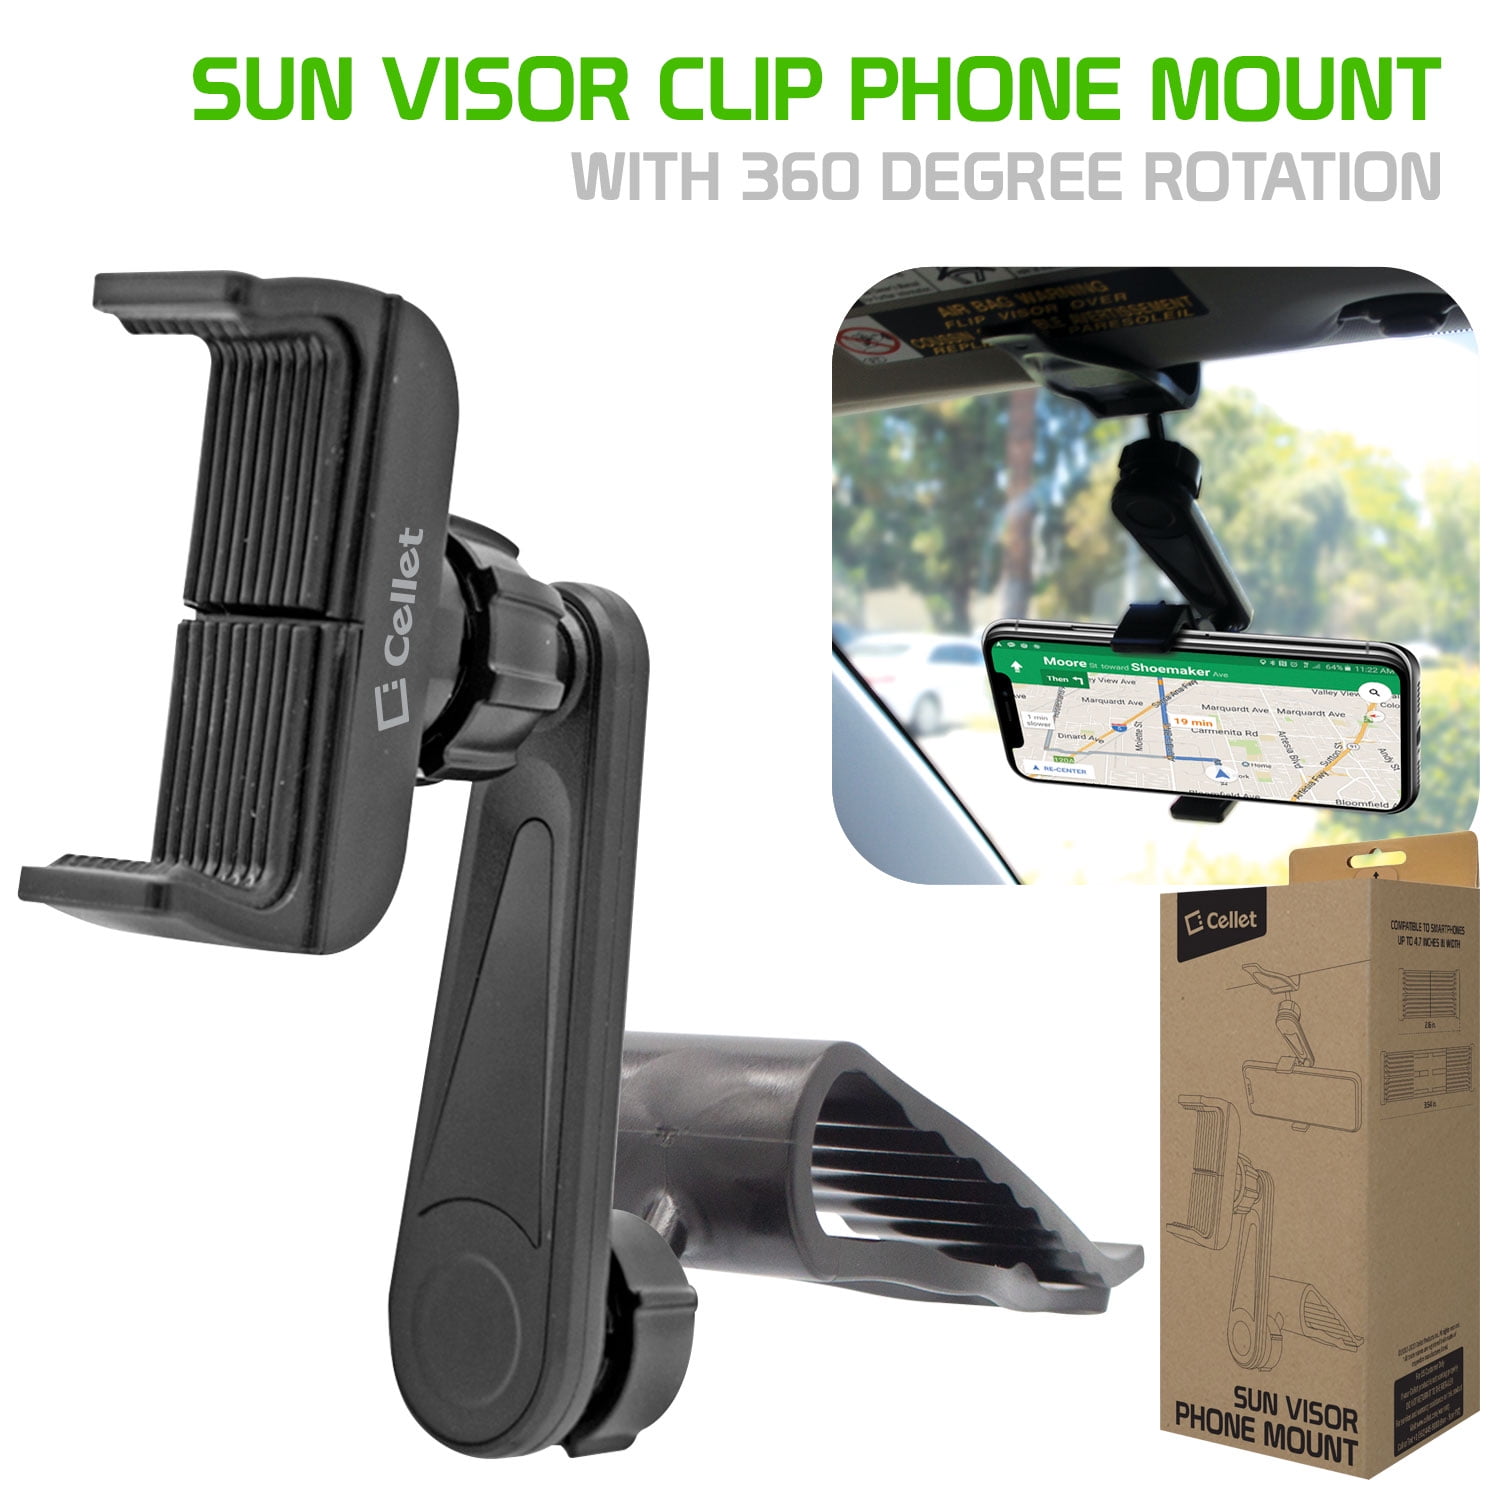 NEW Car Sun Visor Clip Holder Mount Stand for Cellphone iPhone 6/6S Plus /7 Plus 